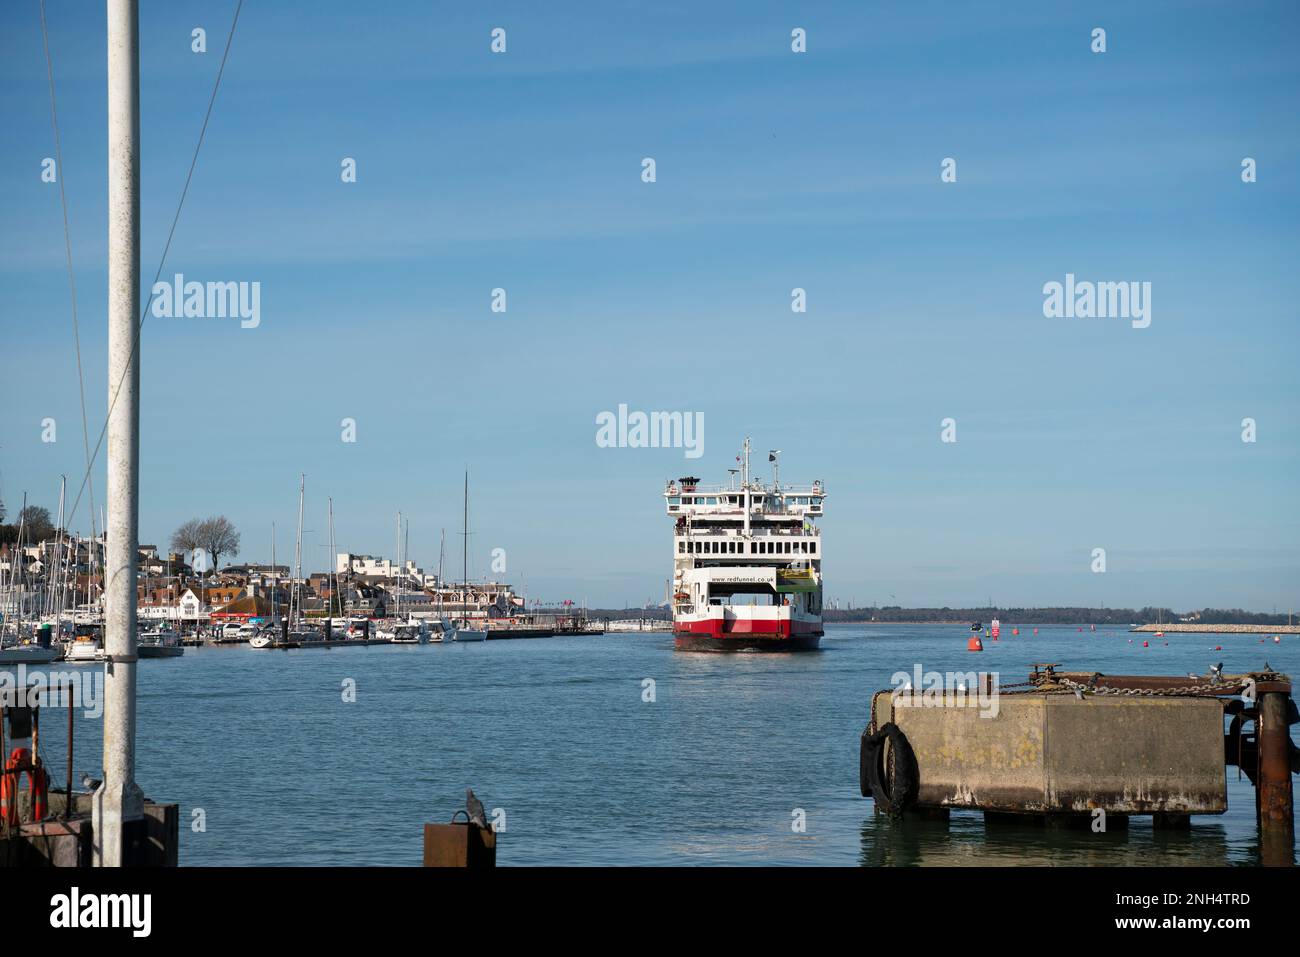 The Red Funnel Ferry, Red Falcon, docking at East Cowes on a sunny day. Stock Photo